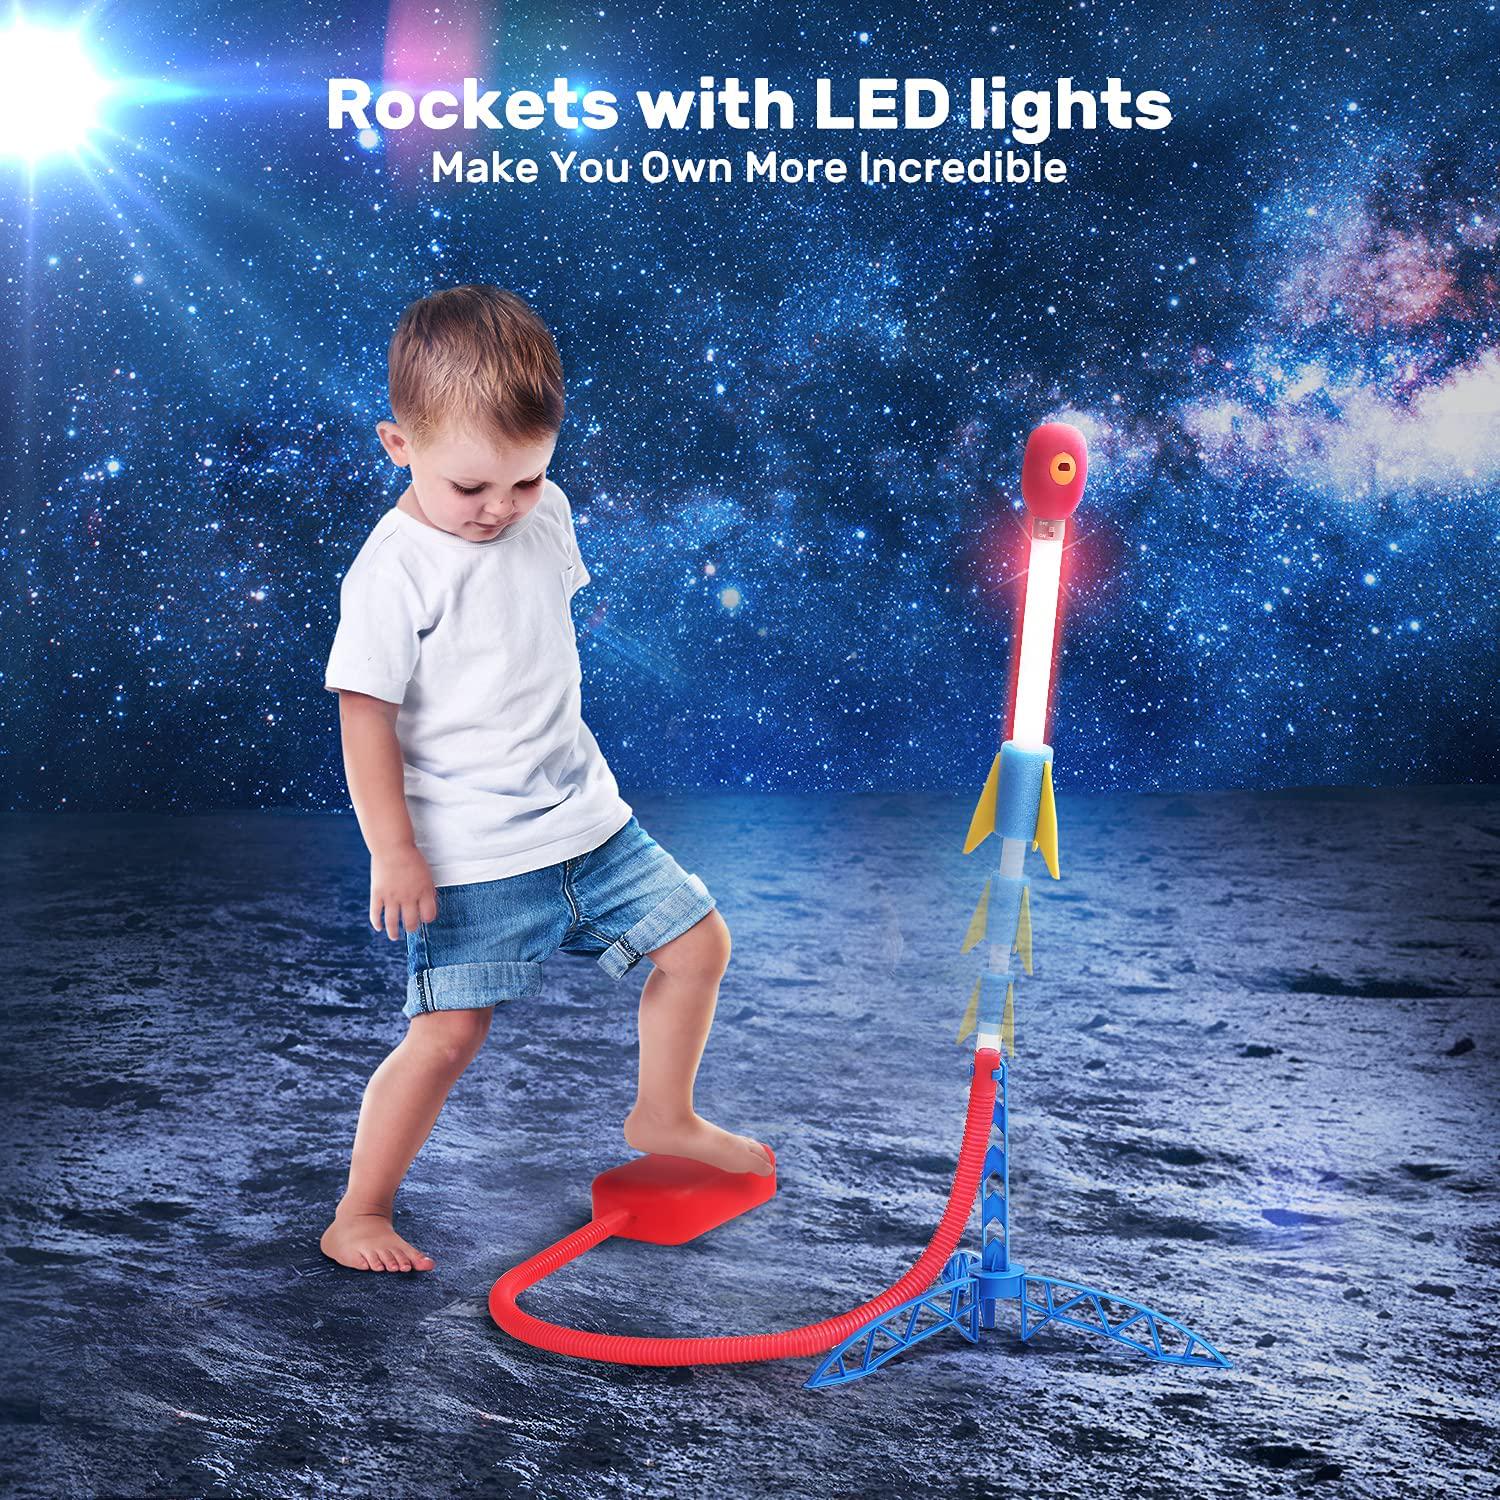 EagleStone, EagleStone Rocket Launcher for Kids Stomp Launch Toys with 3 LED Rockets Foam Tipped Rockets up to 100 Feet,Outdoor Rocket Stem Gift for Boys and Girls Ages 5 6 7 8,Great Outdoor for Outside Play